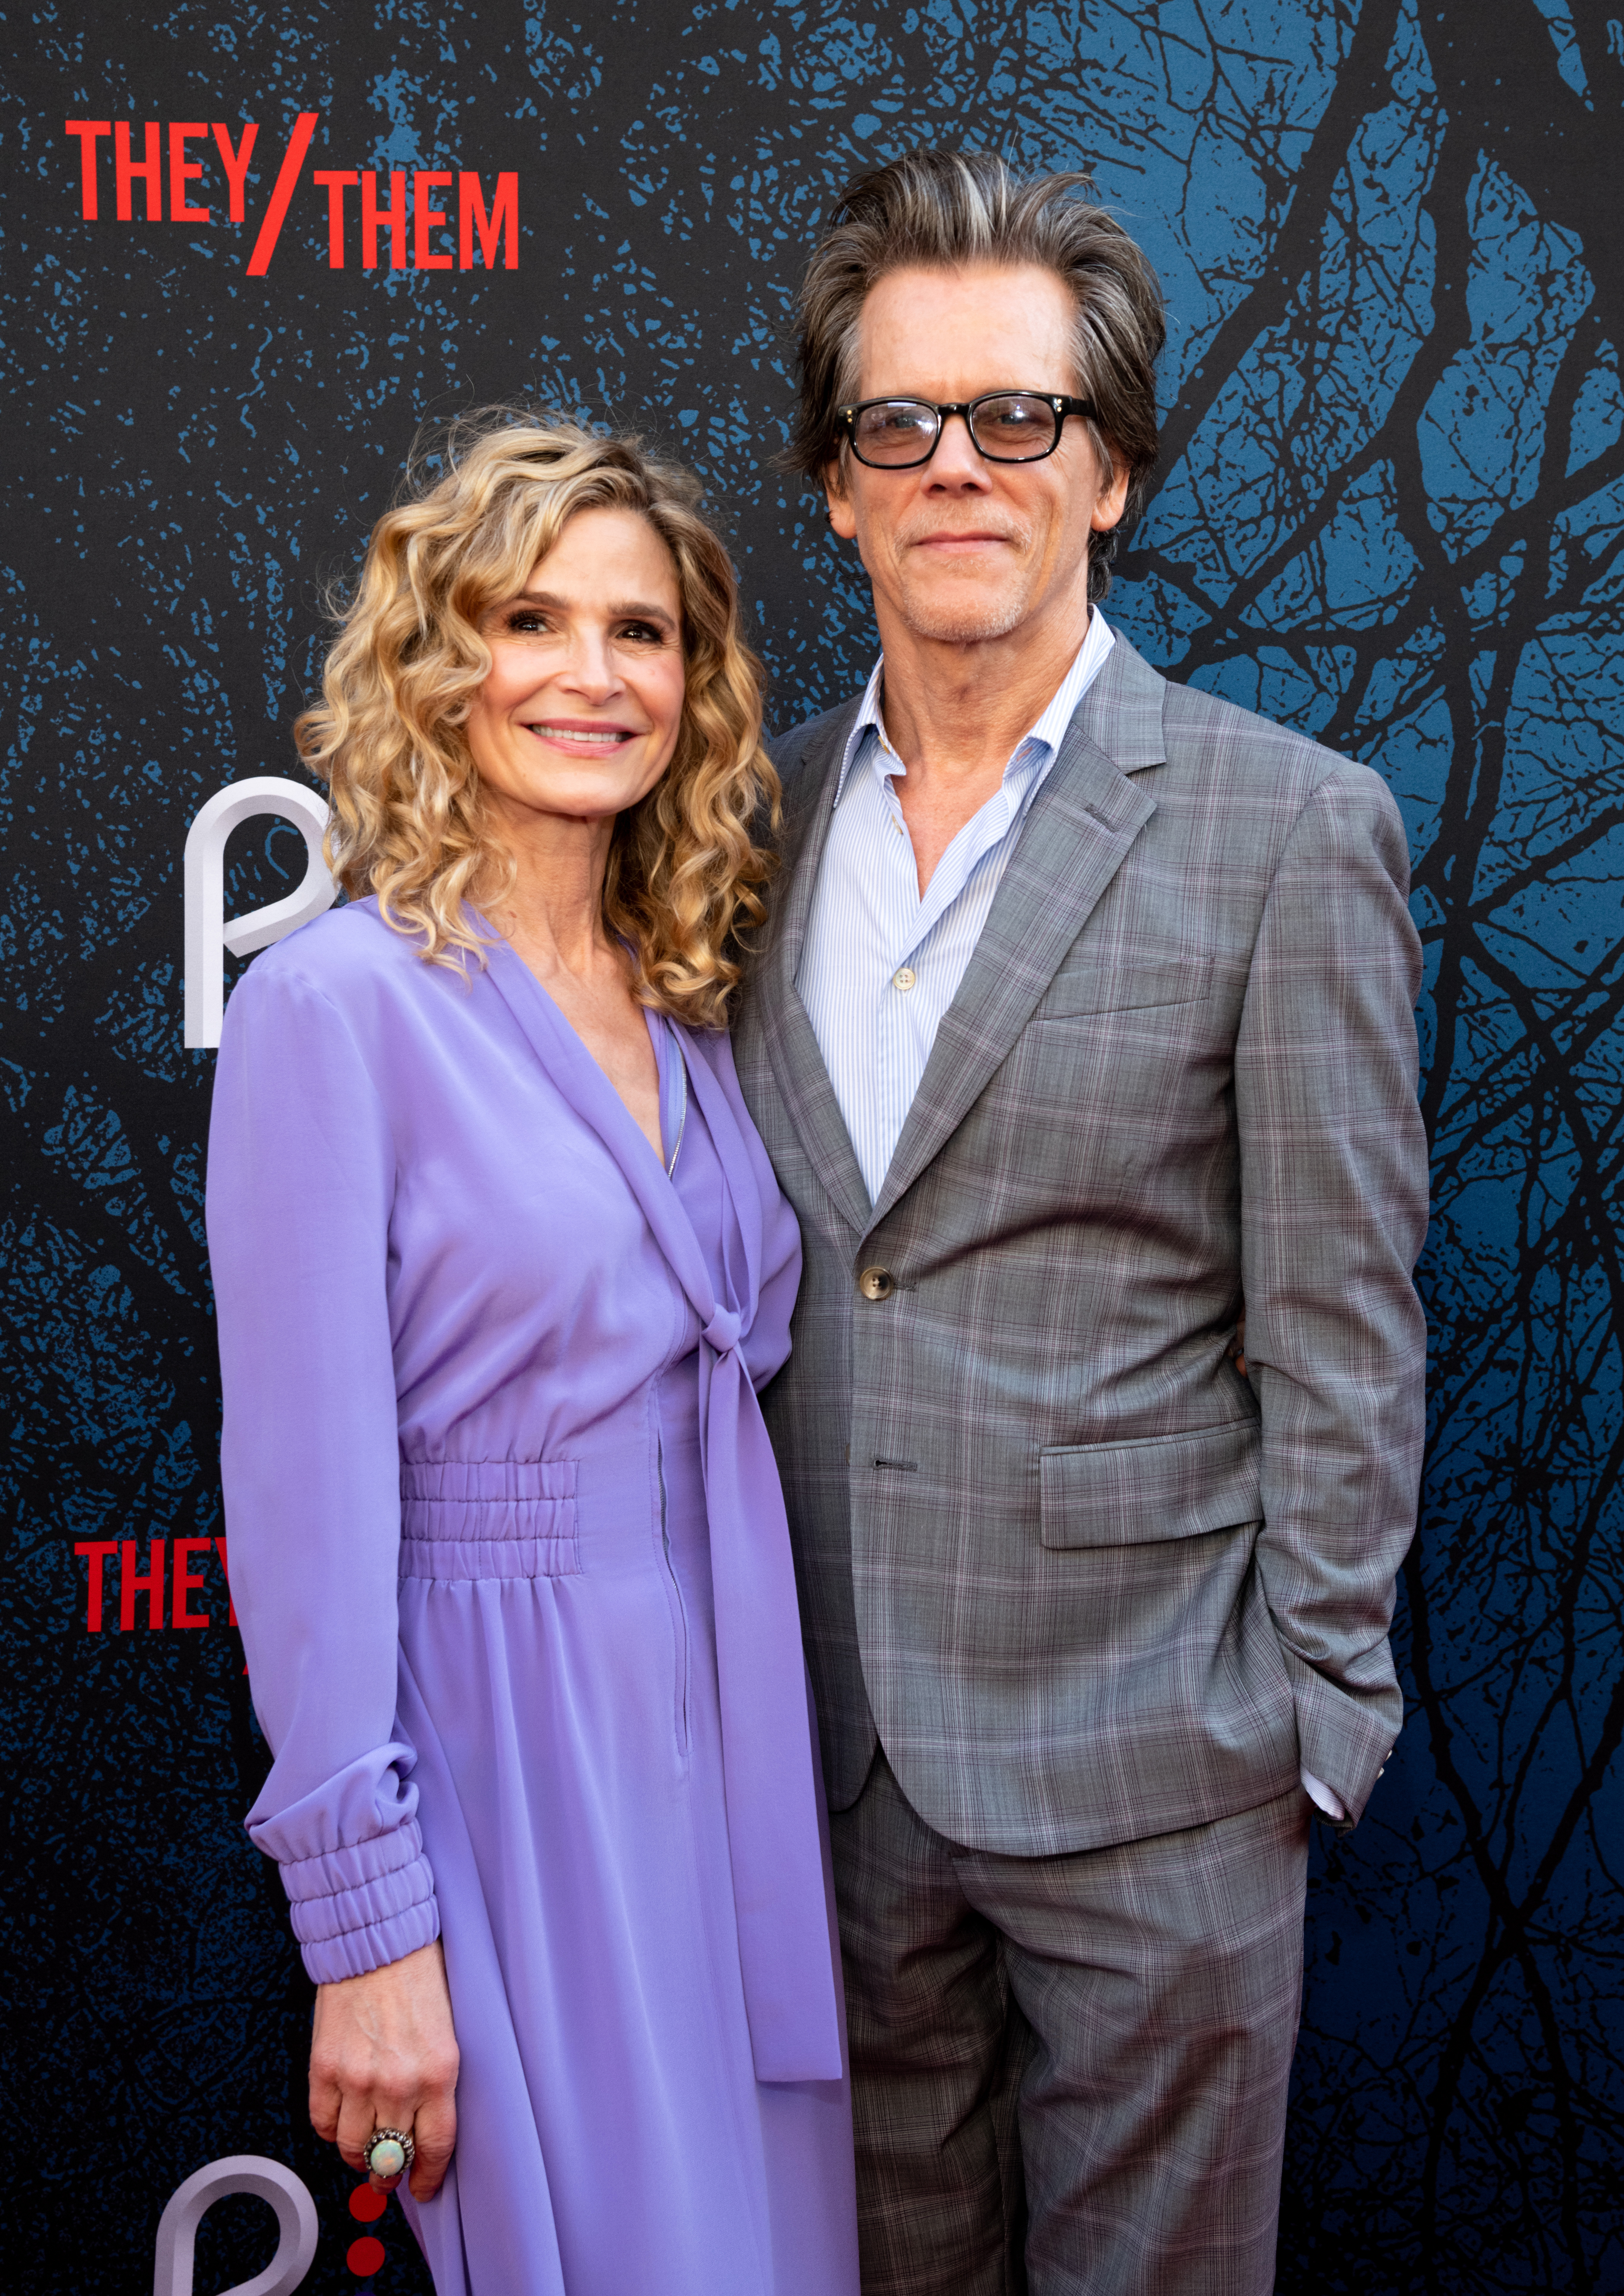 Actors Kyra Sedgwick (L) and Kevin Bacon attend the 2022 Outfest Los Angeles LGBTQ+ Film Festival closing night “They/Them” world premiere at Ace Hotel on July 24, 2022, in Los Angeles, California. | Source: Getty Images